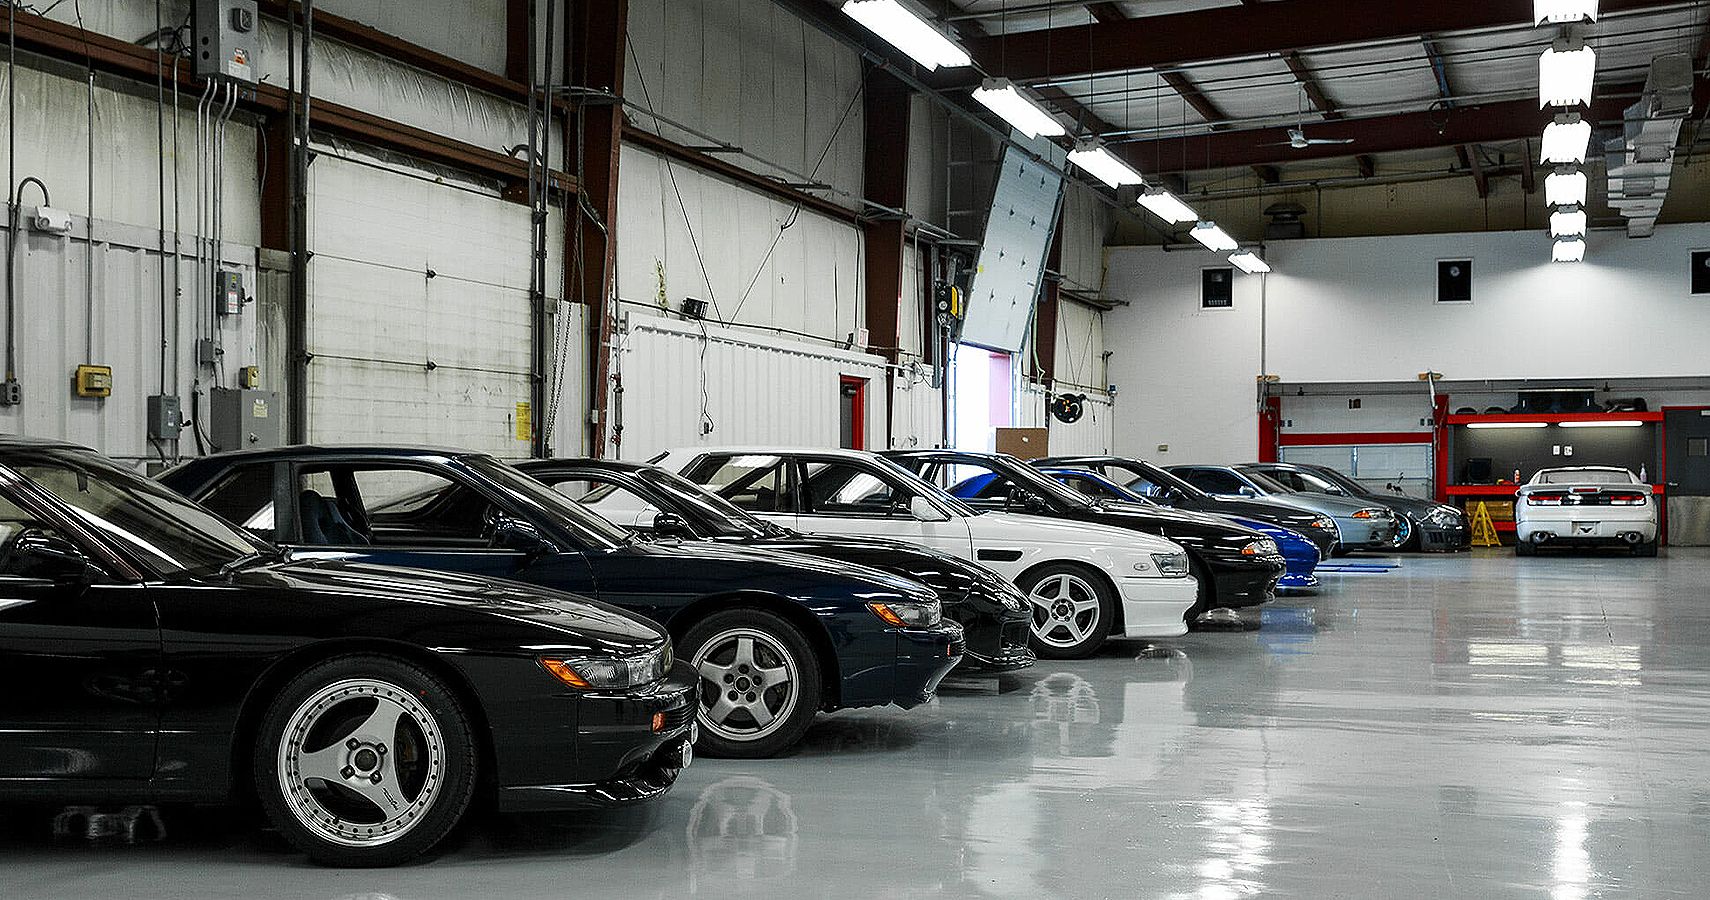 There Is A The 25-Year Cooling Period For JDM Cars